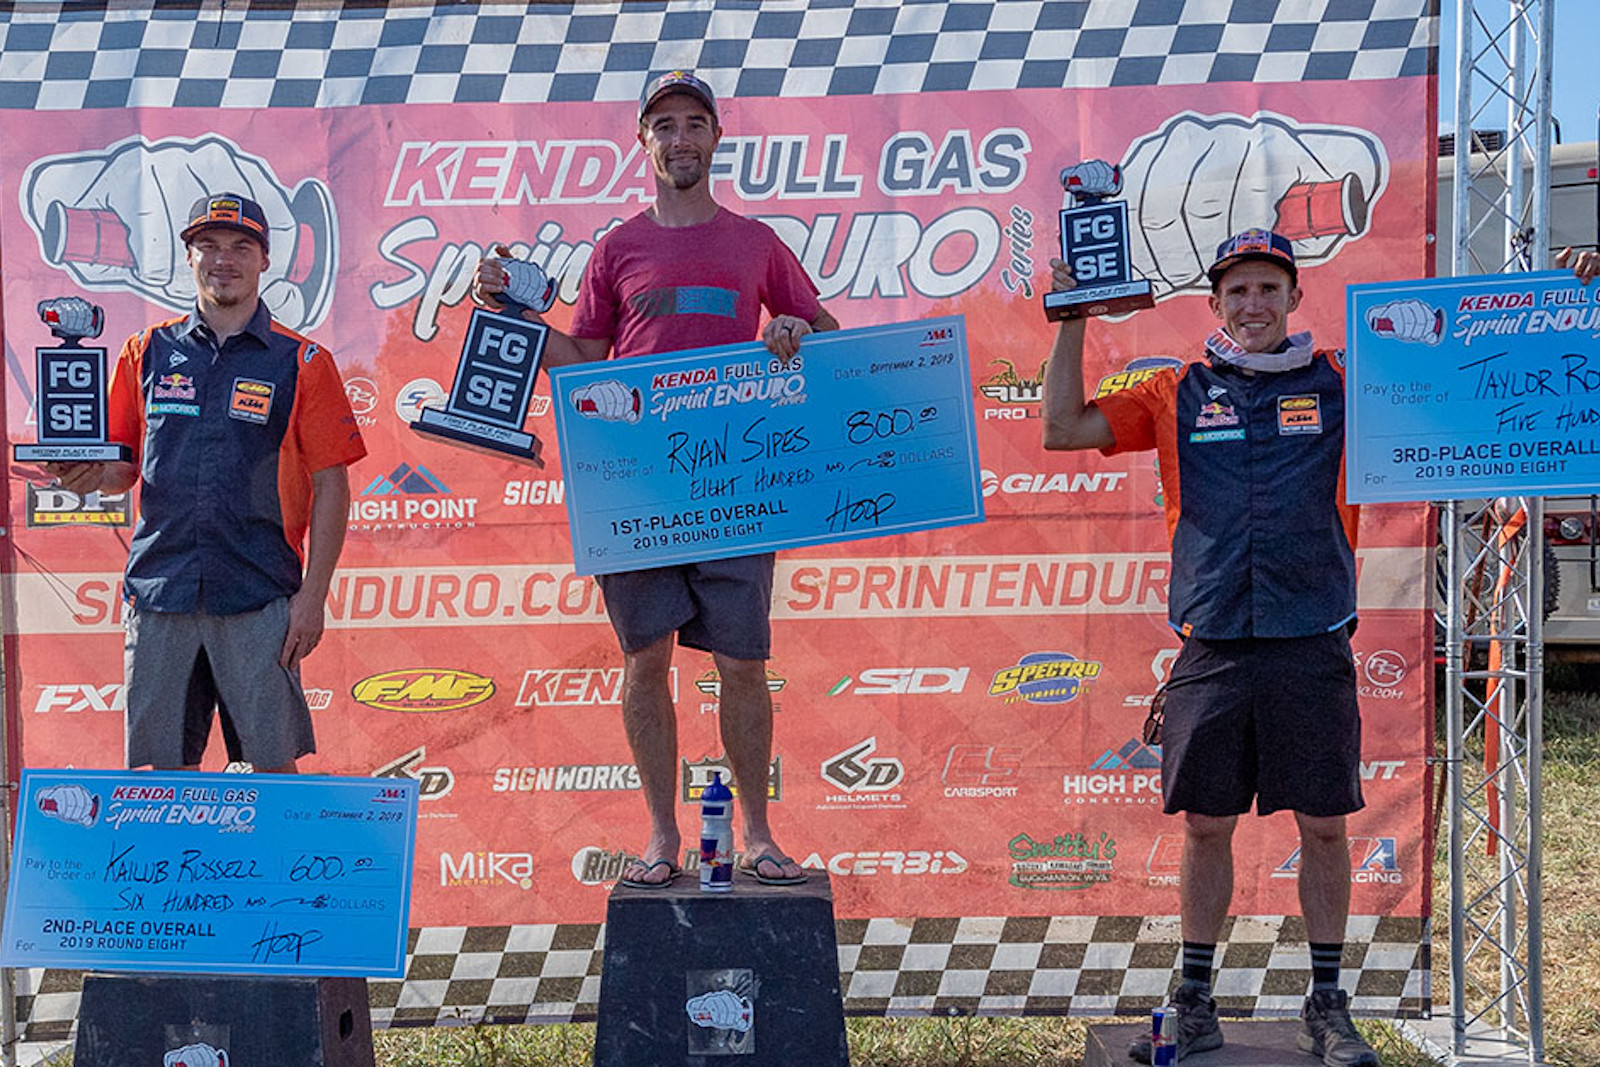 Ryan Sipes tops USA's best at Full Gas at Sprint Enduro final round 